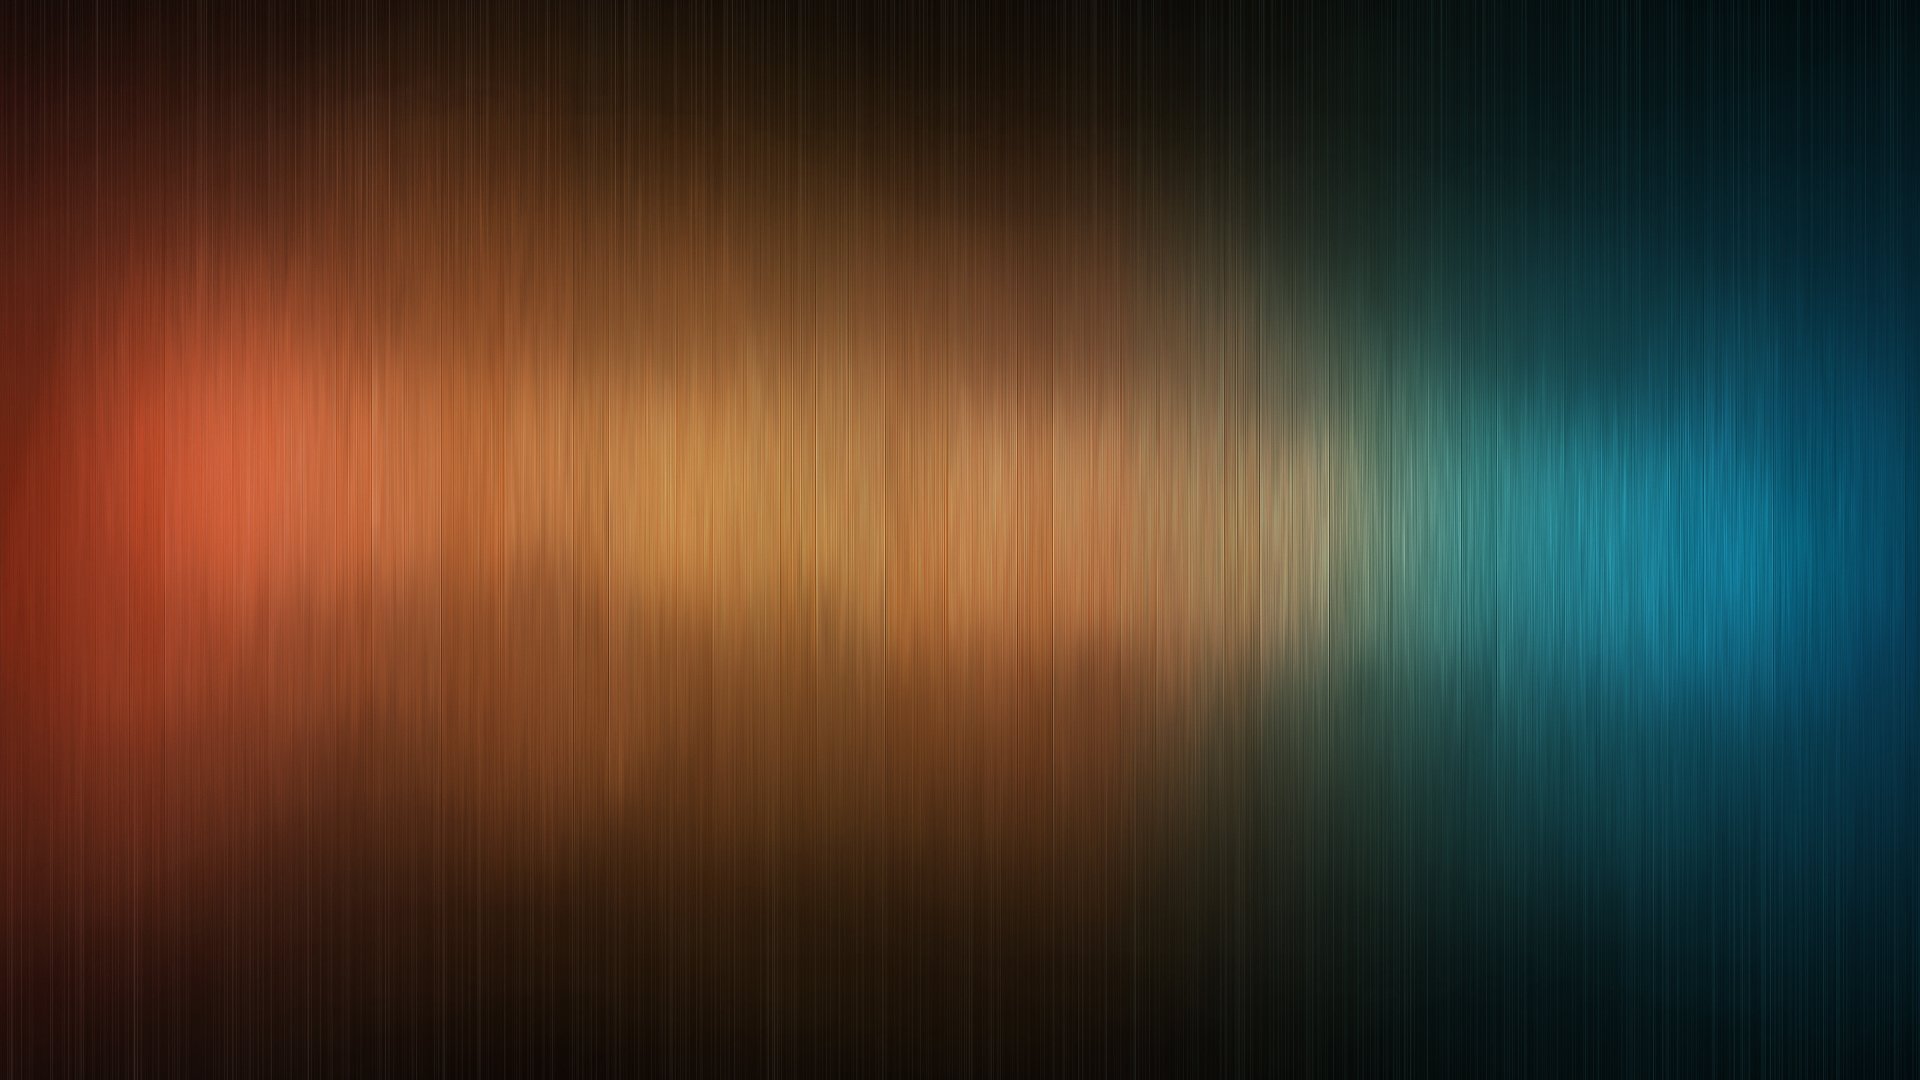 abstract, Art, Colorful, Colors, Design, Illustration, Light, Theme Wallpaper